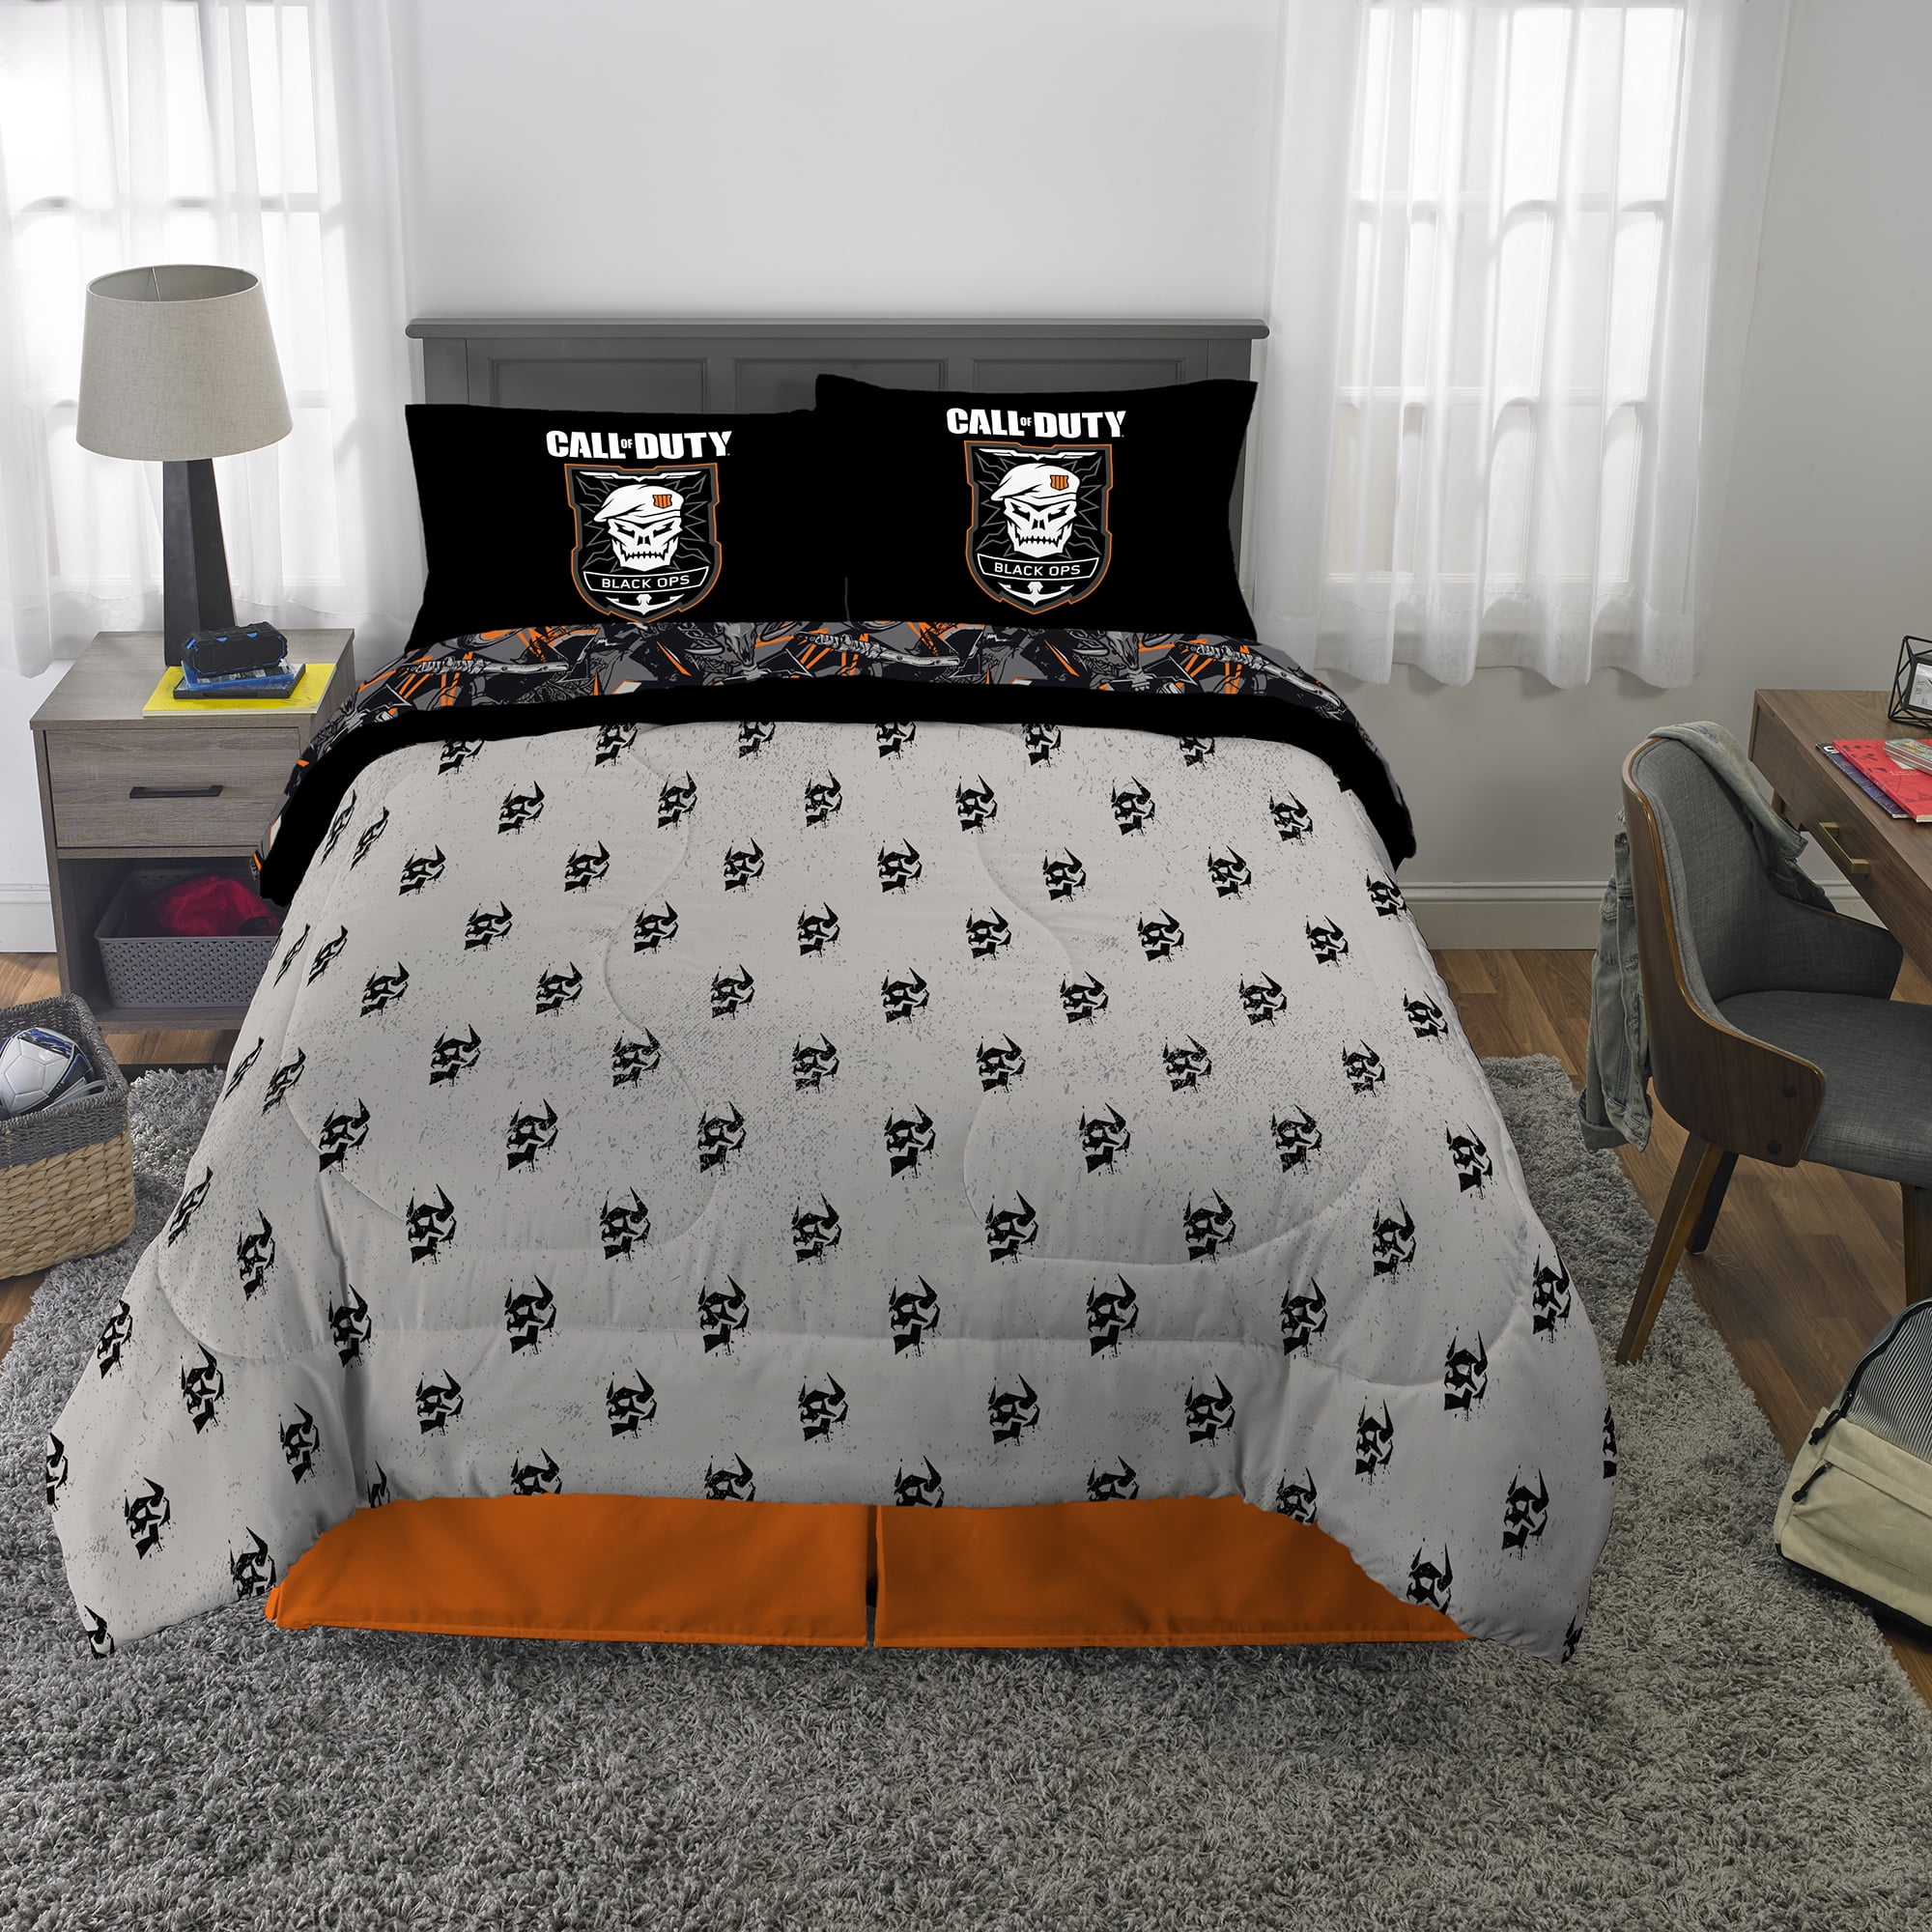 Bed In A Bag Bedding Set, Call Of Duty Twin Bed Sheets